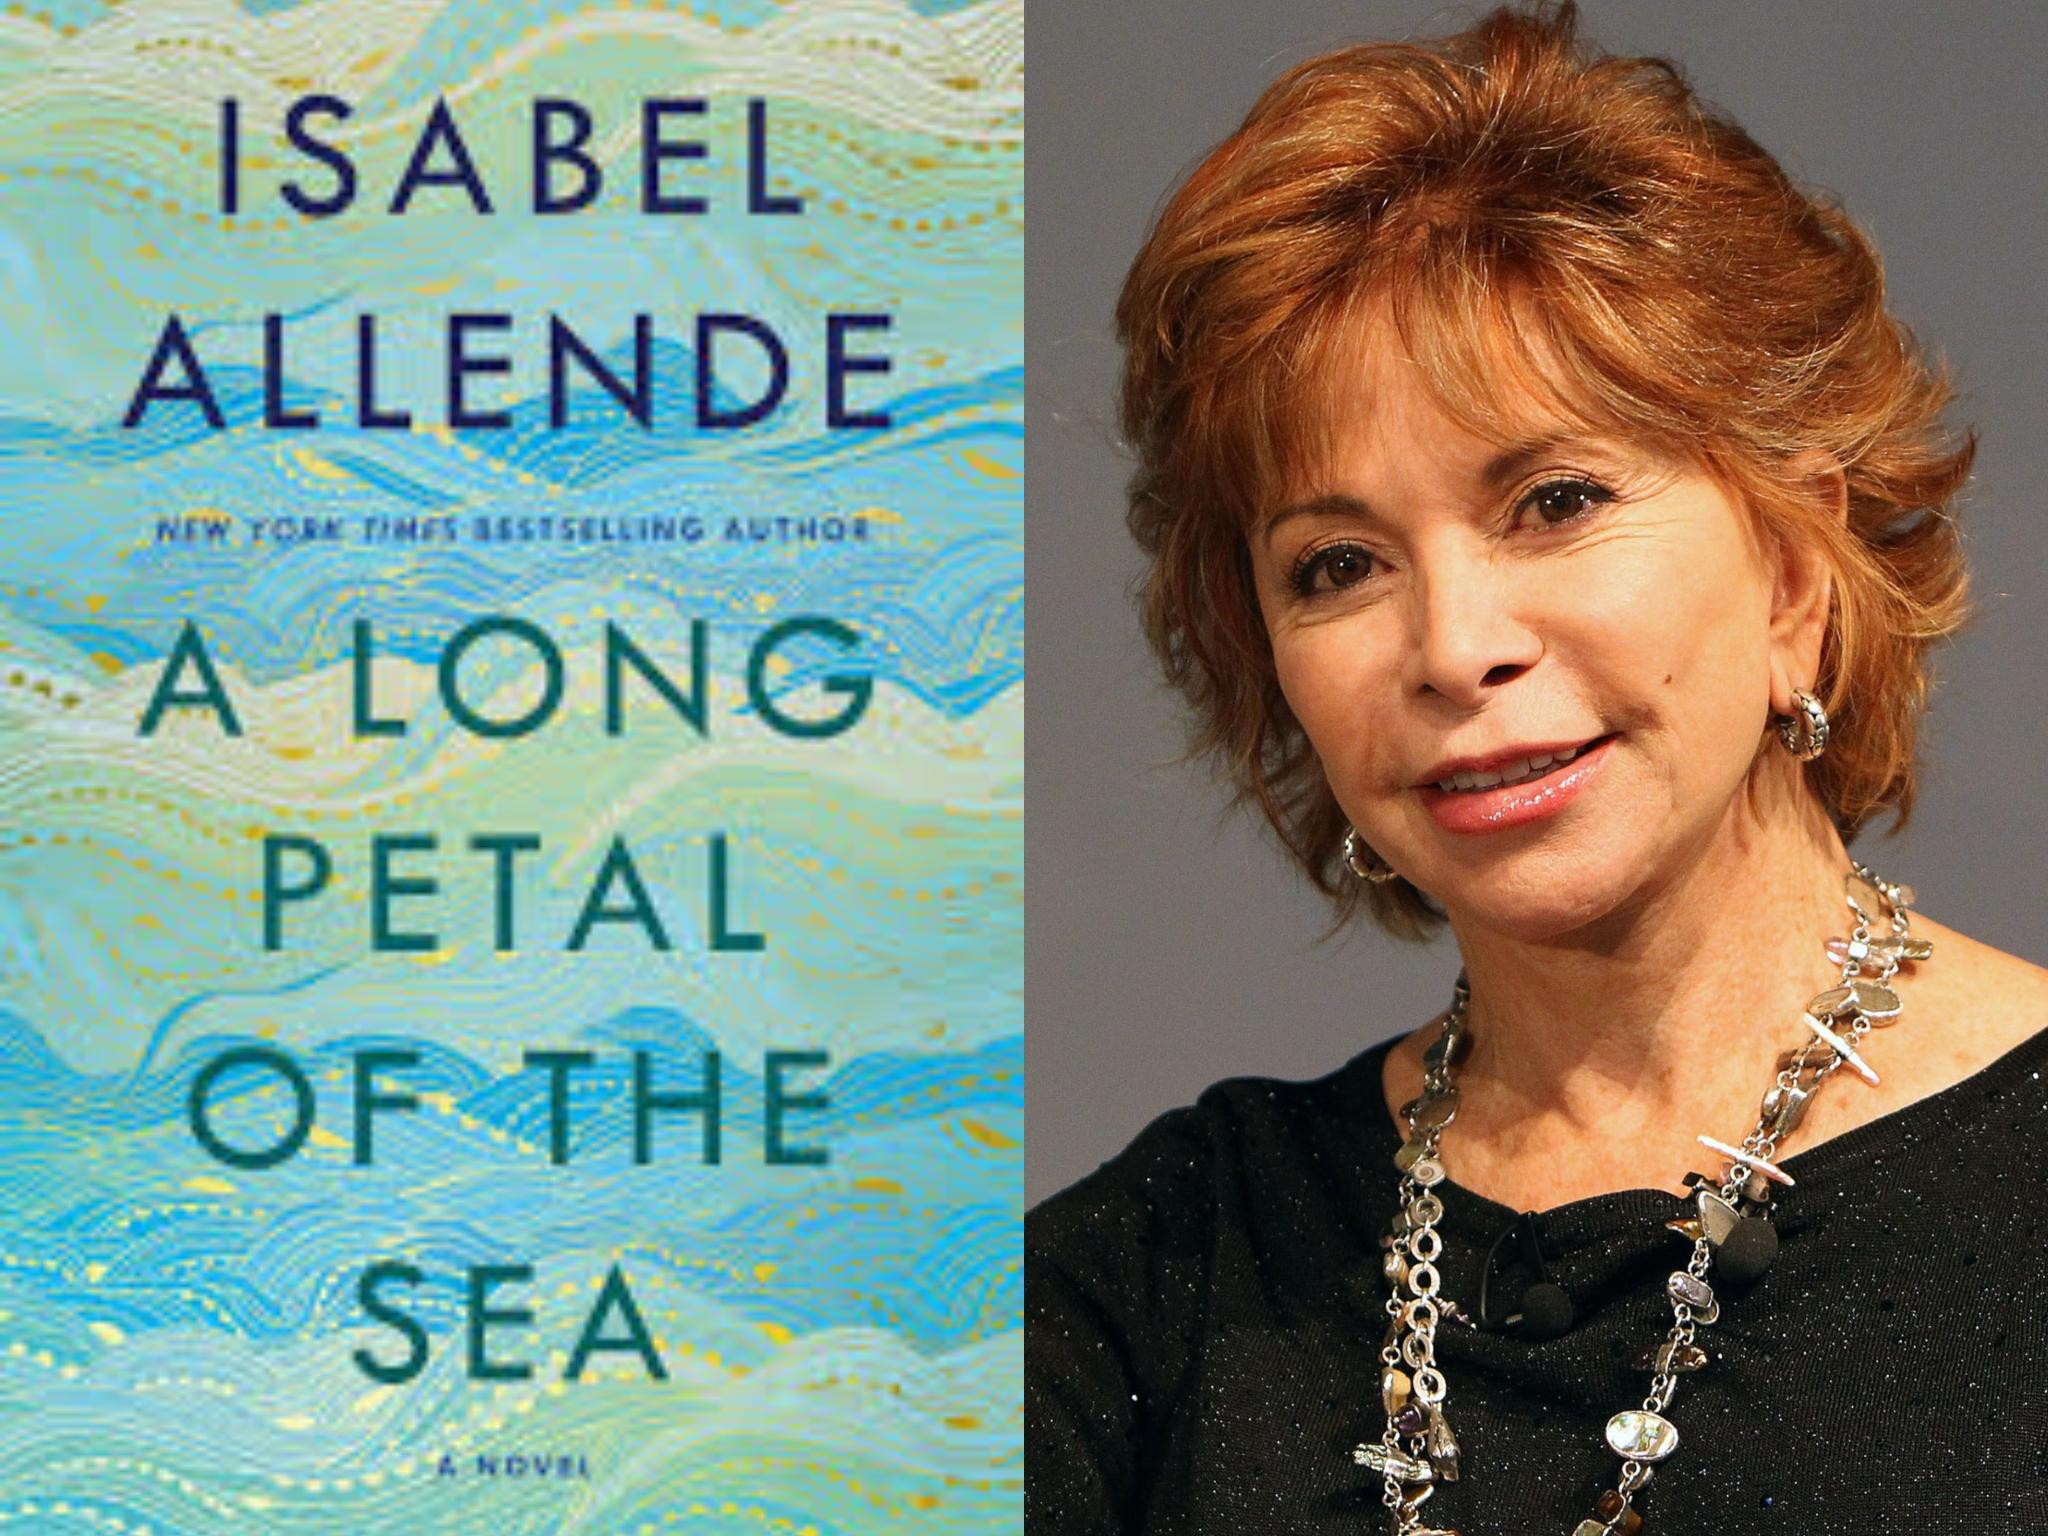 Isabel Allende’s new book is a masterful work of historical fiction about hope, exile and belonging (Getty)